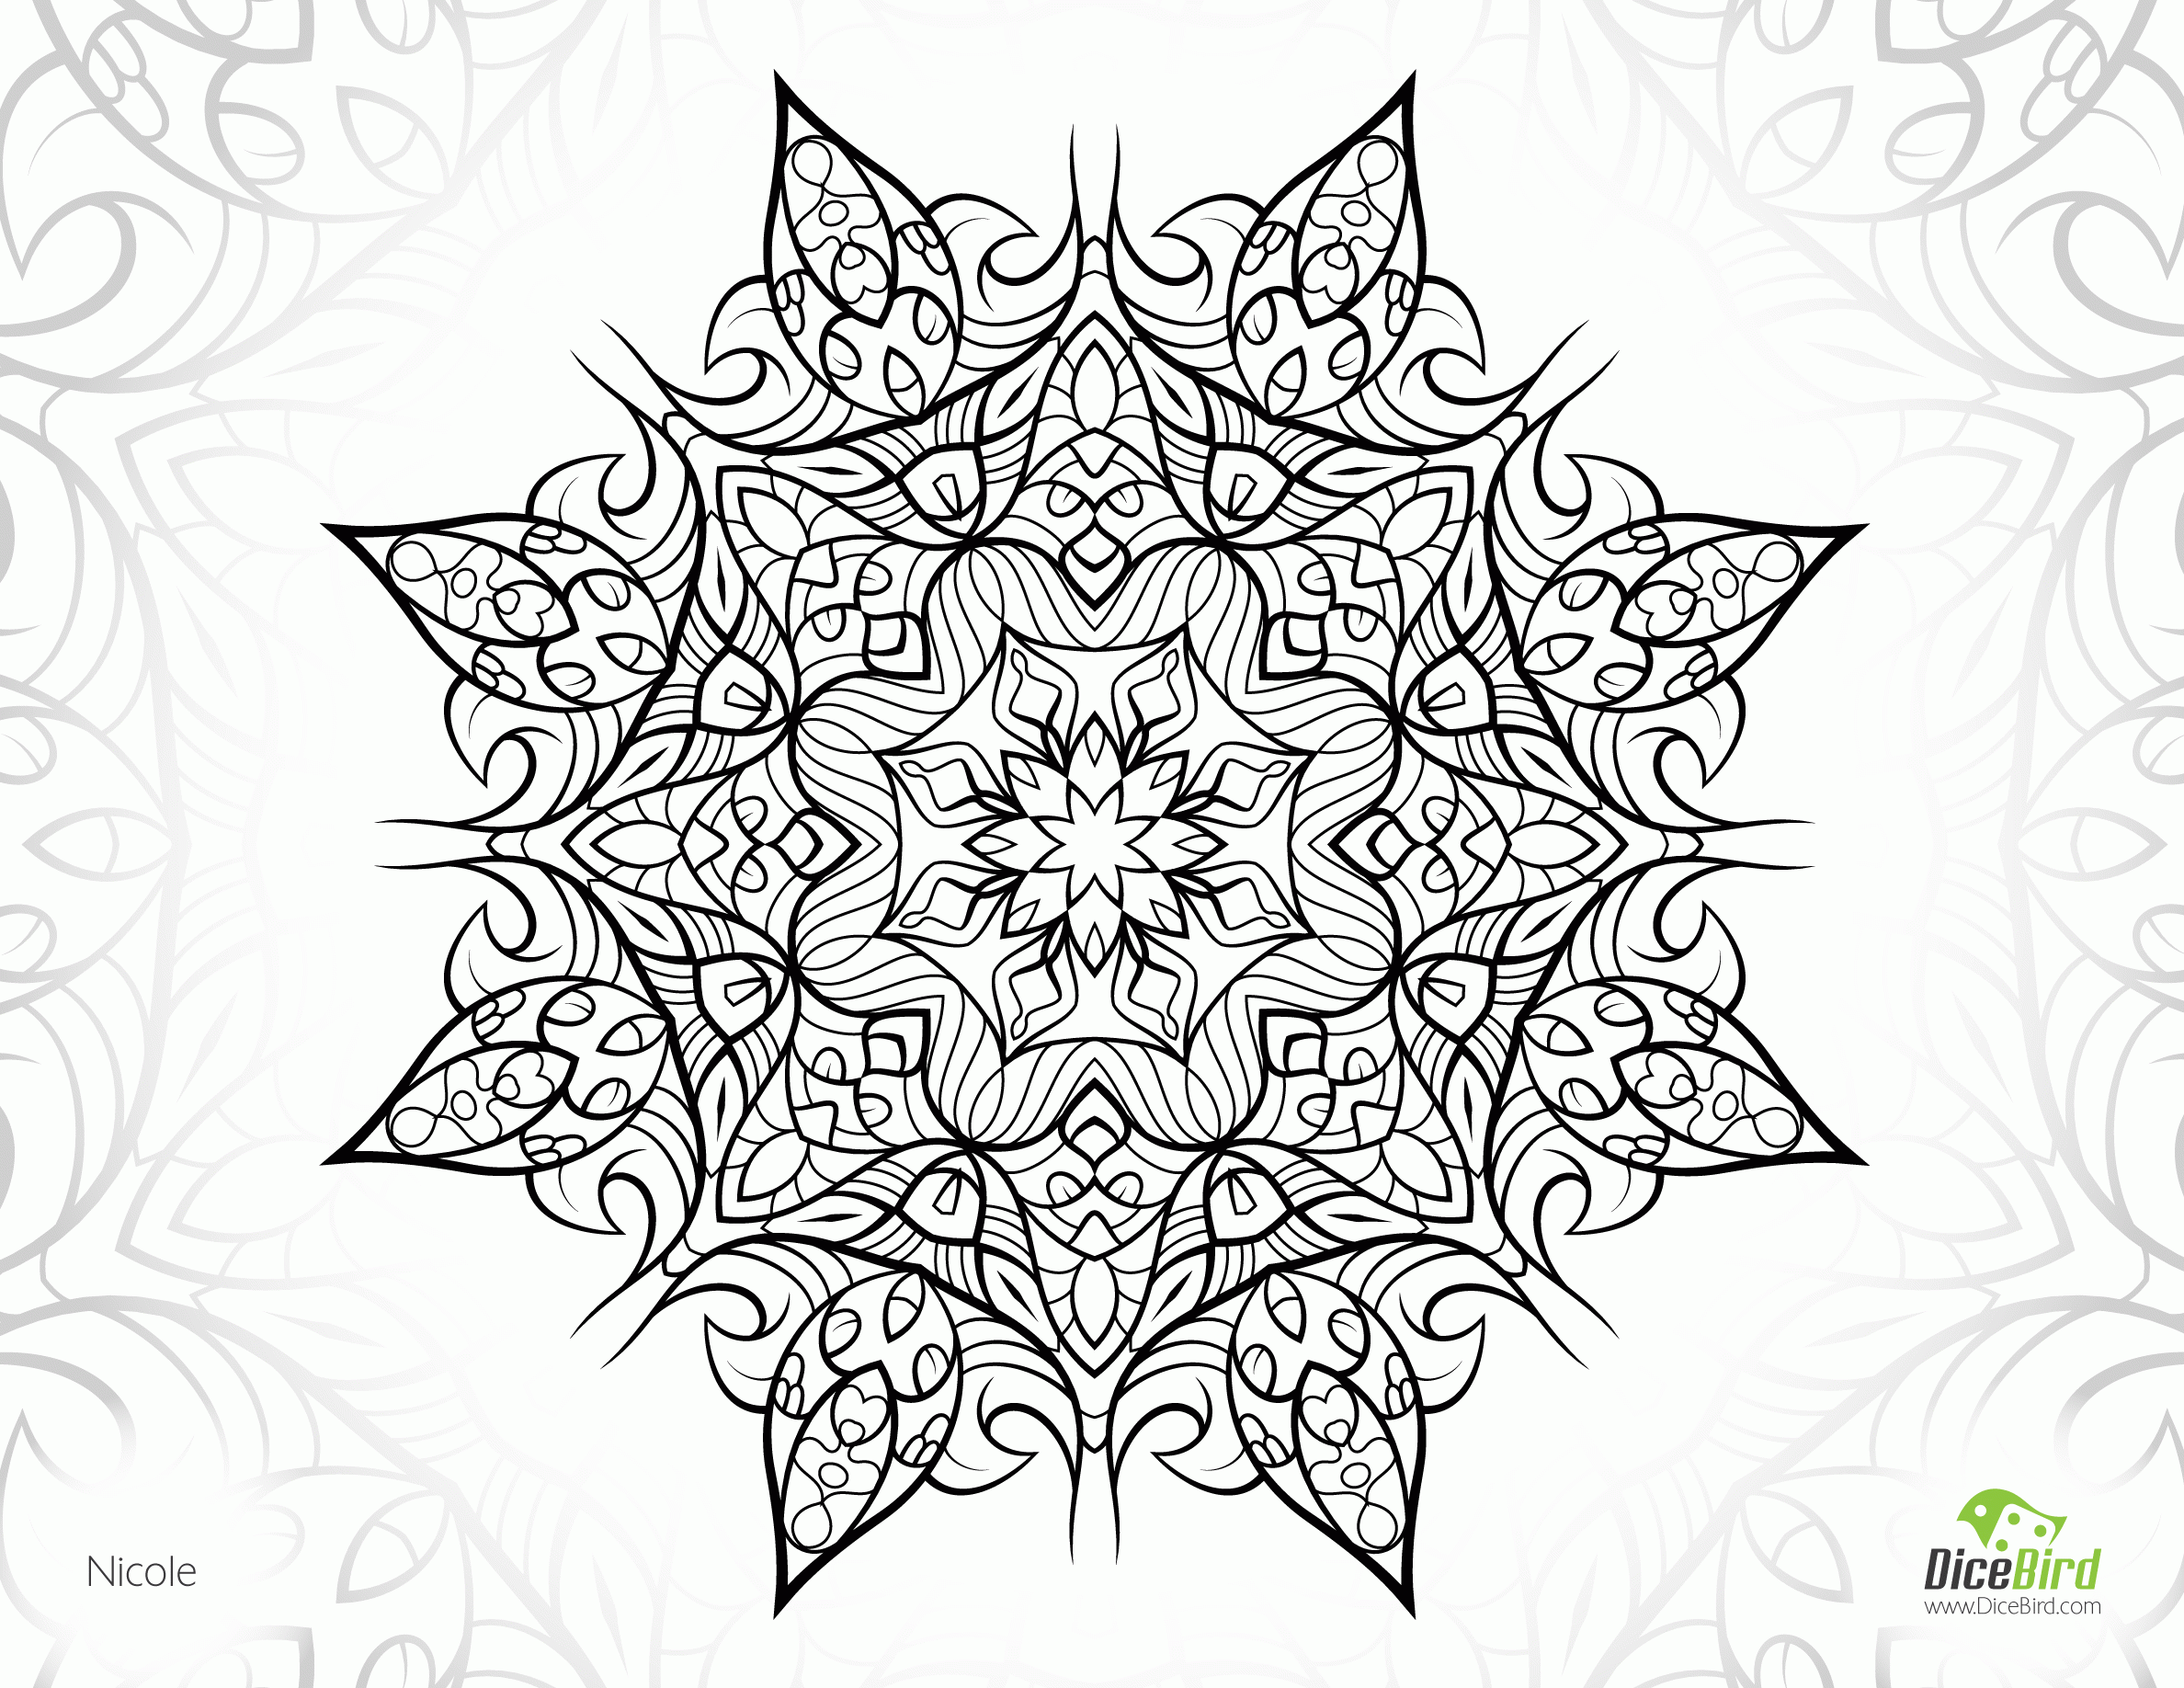 Nicole flower free printable complex coloring pages